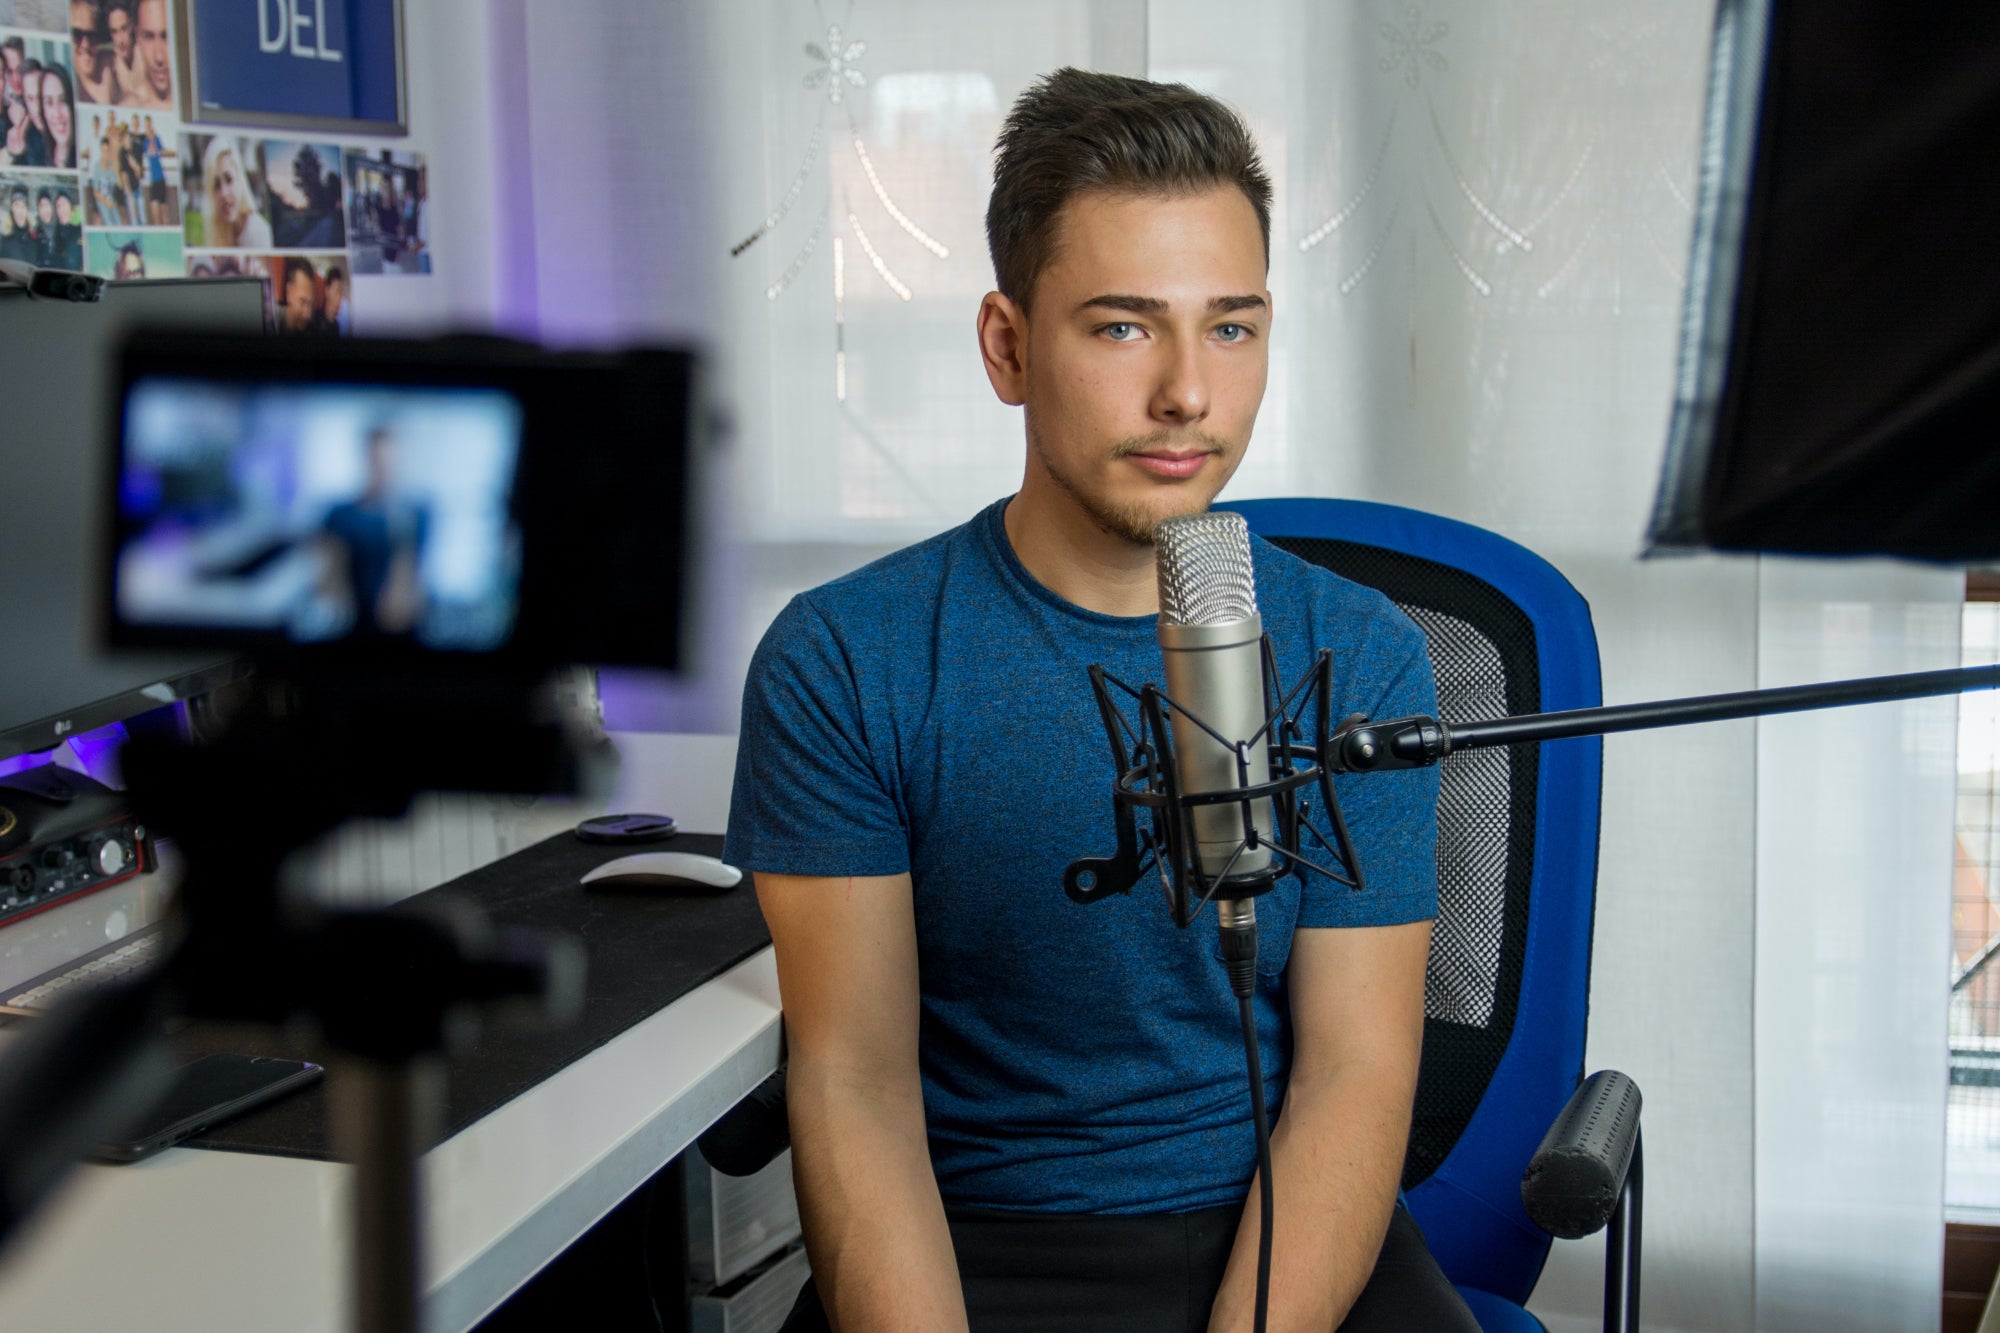 A young person sits in front of a computer and a microphone